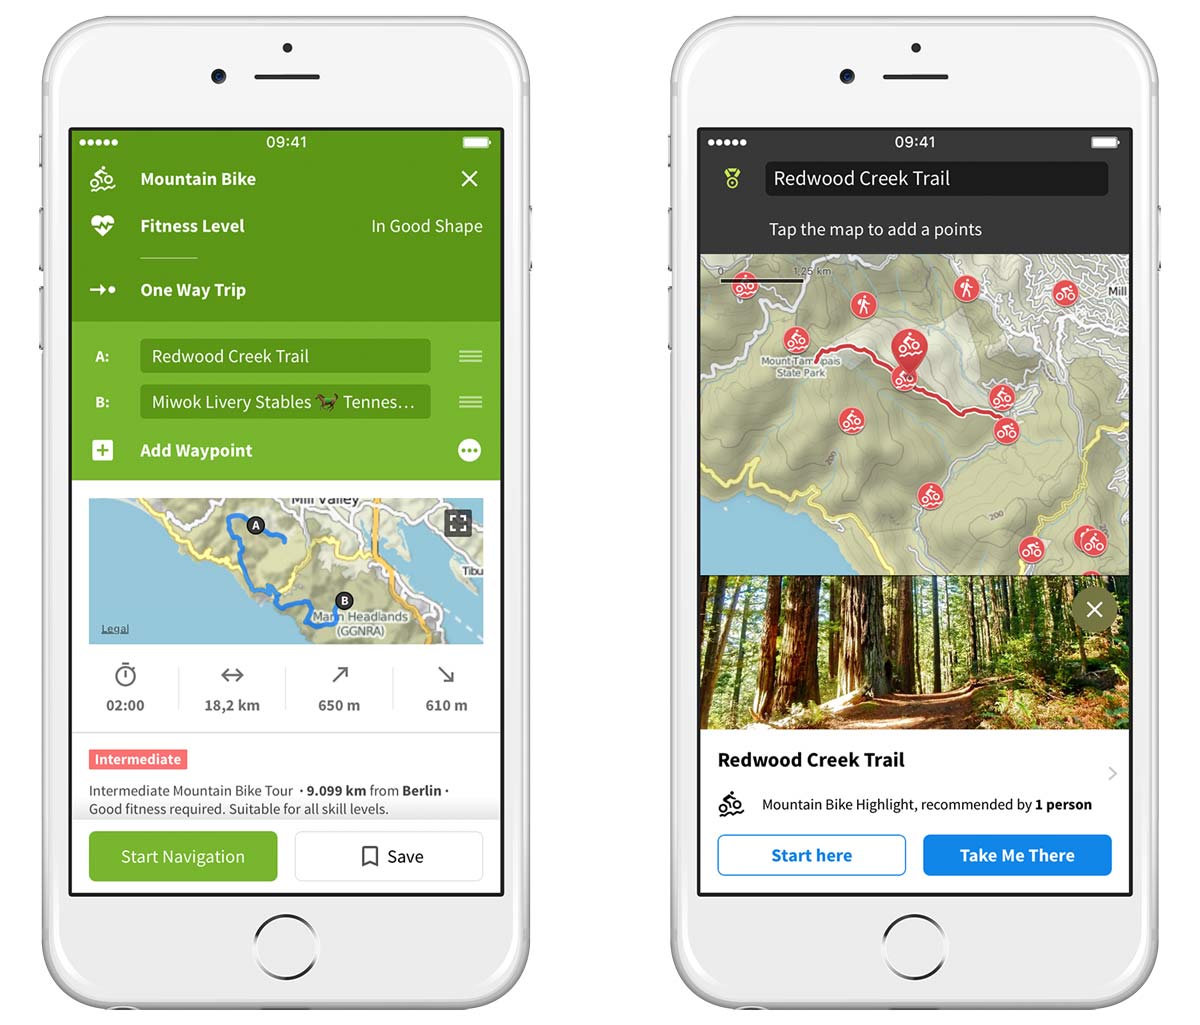 komoot lets you plan mountain bike routes and navigates you through the trail